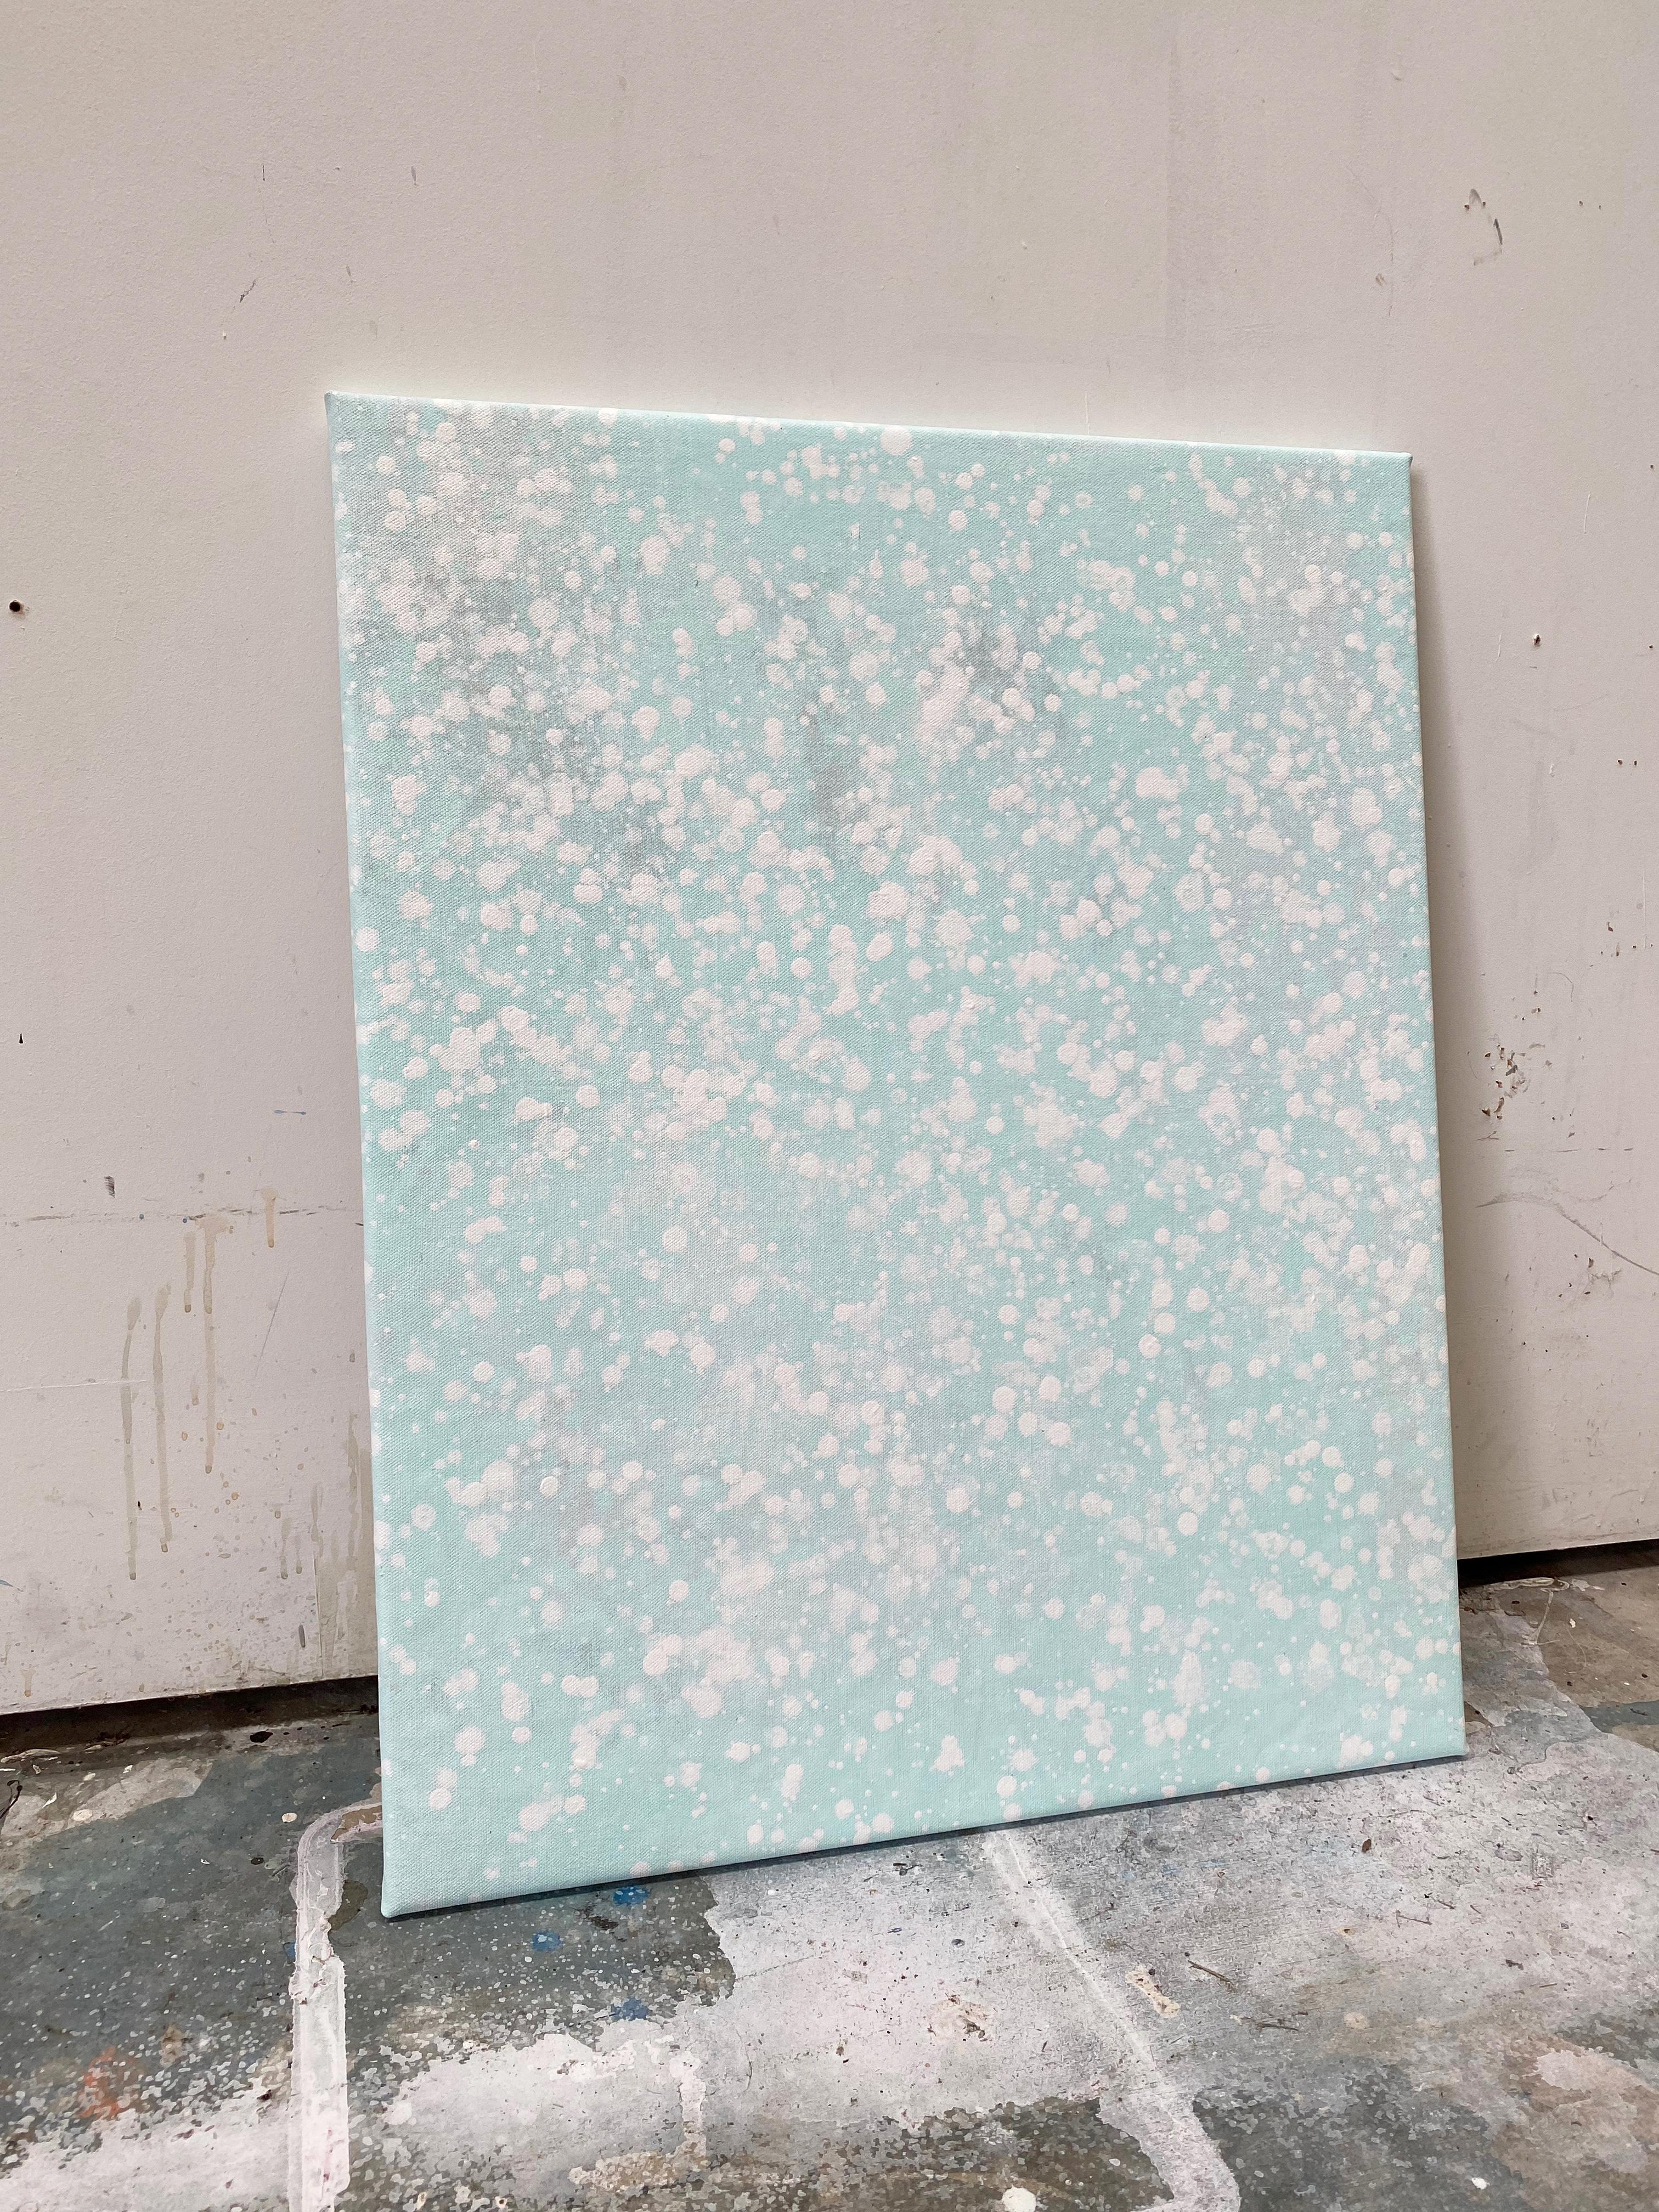 Its snowing pastel mint green dot abstract expressionist painting on linen - Minimalist Painting by Kathleen Rhee